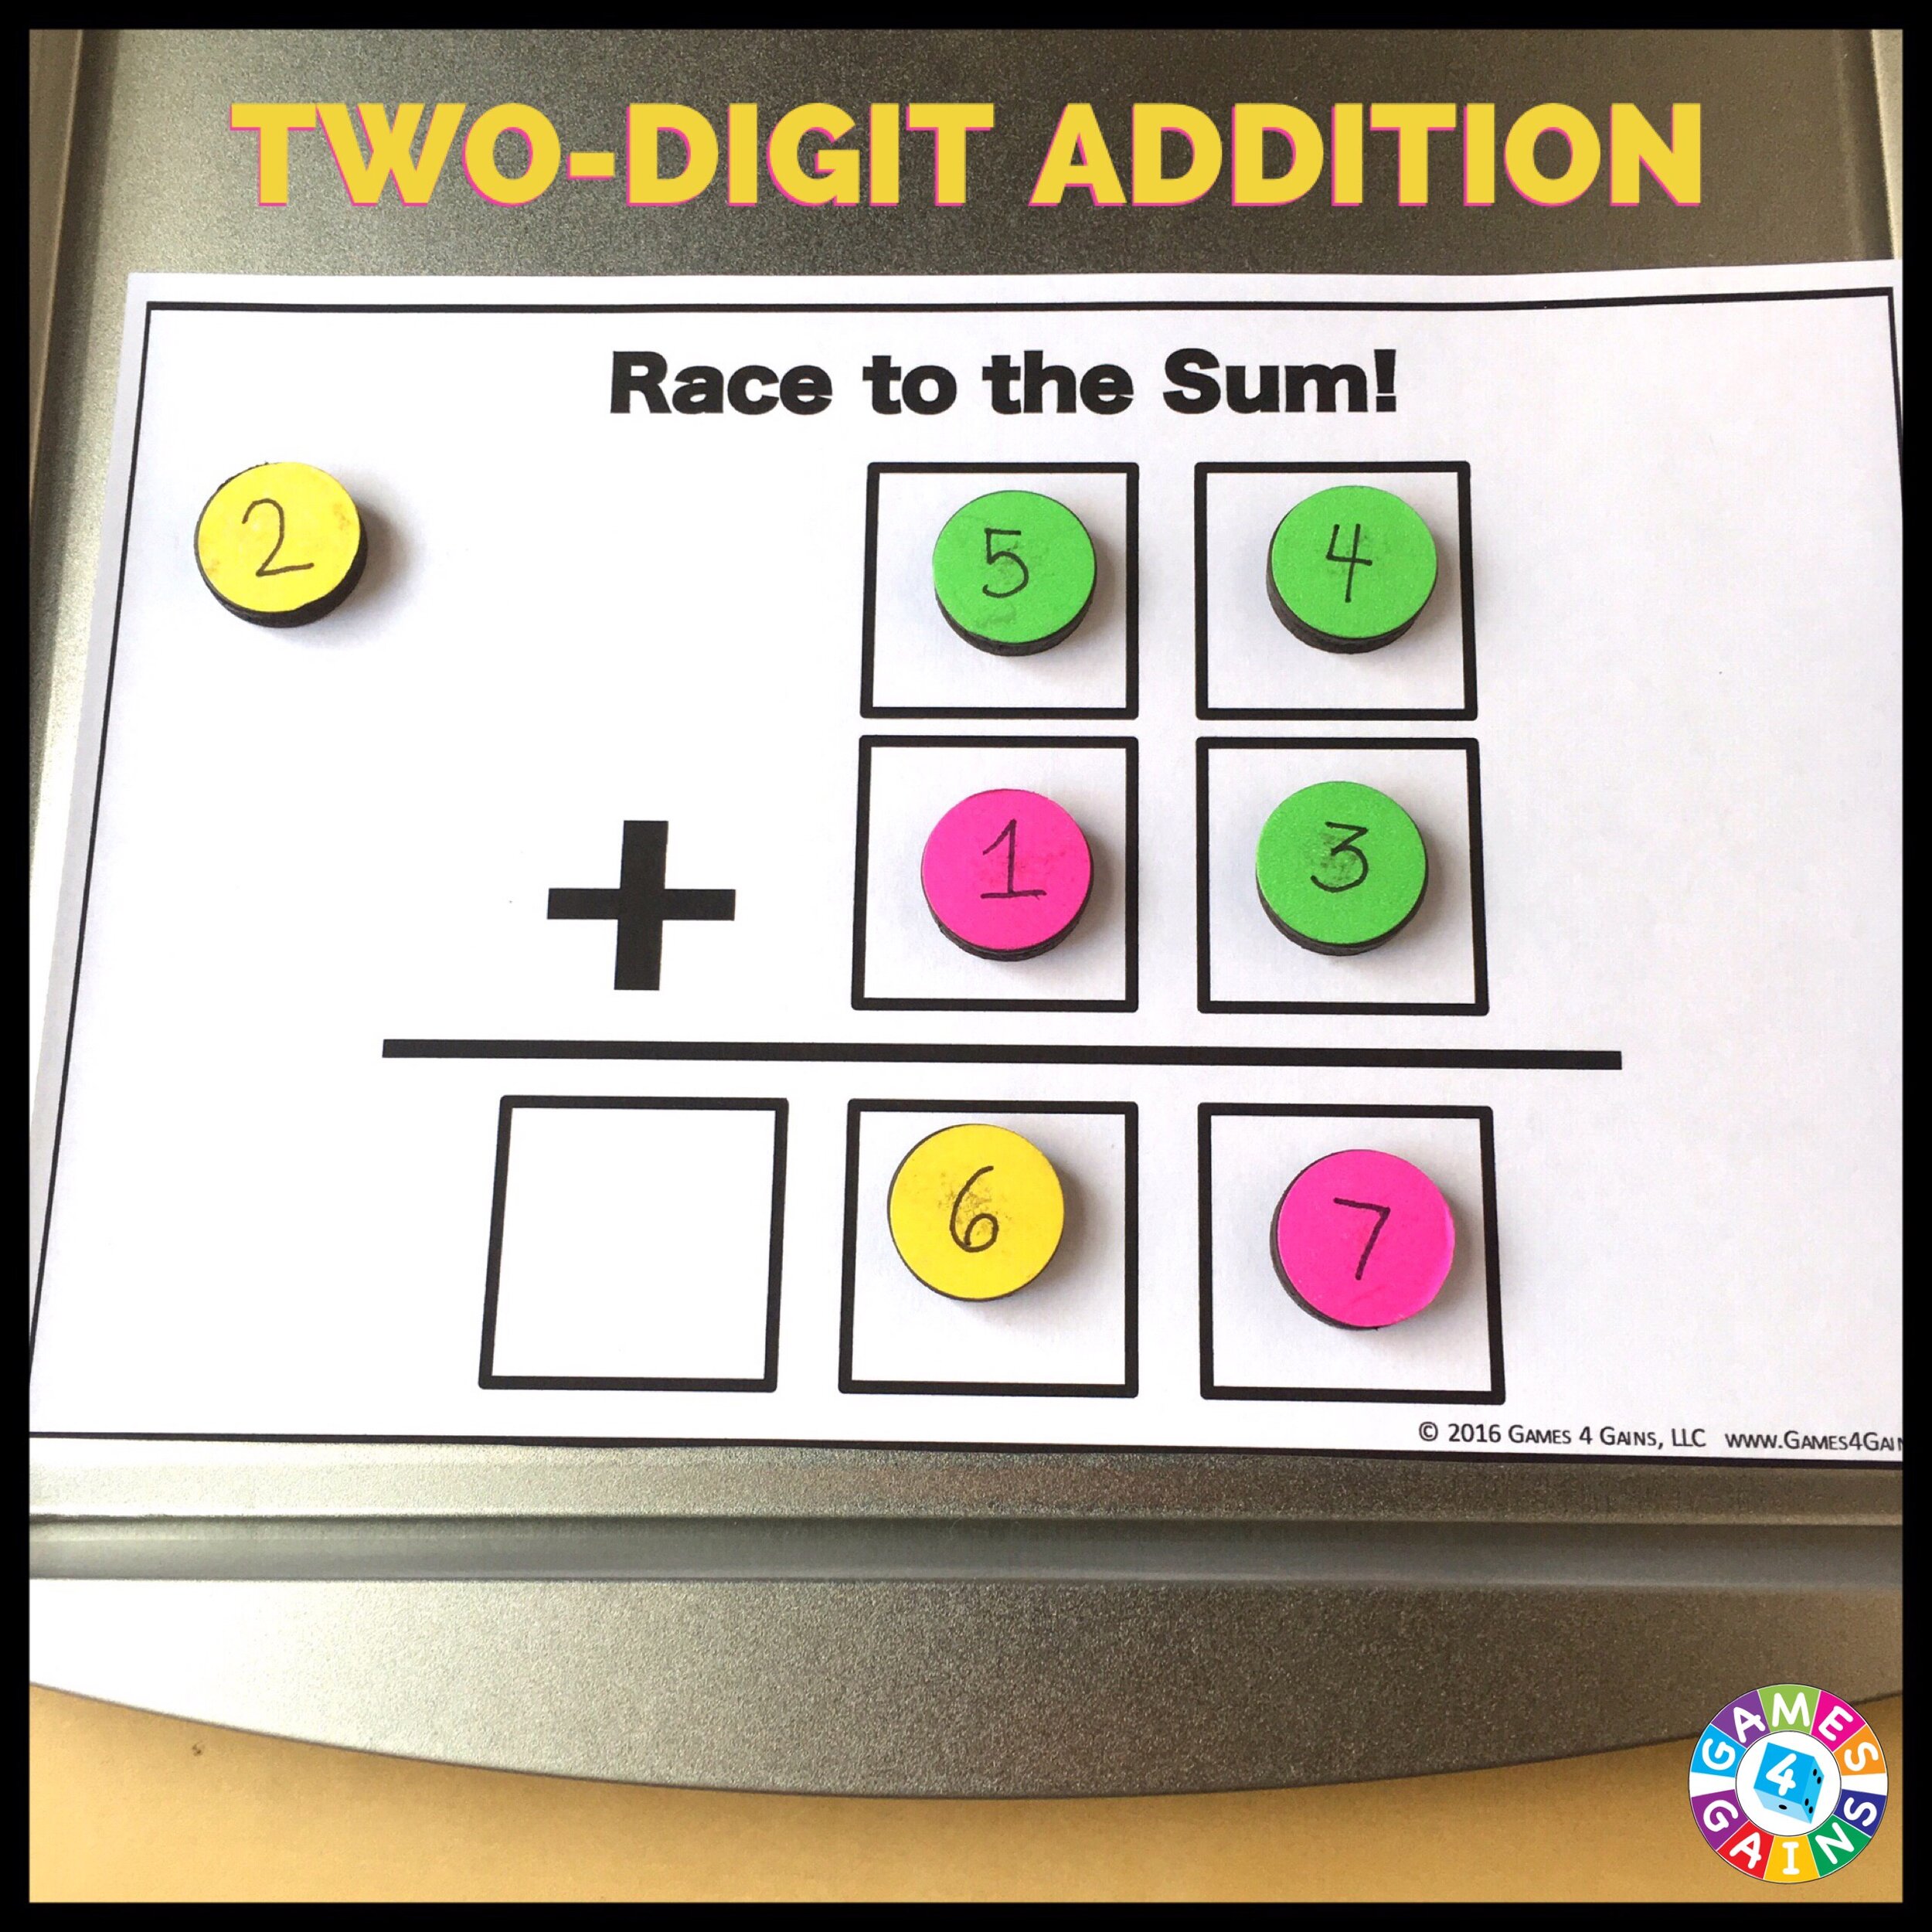 Race to the Sum 2-Digit Addition.JPG